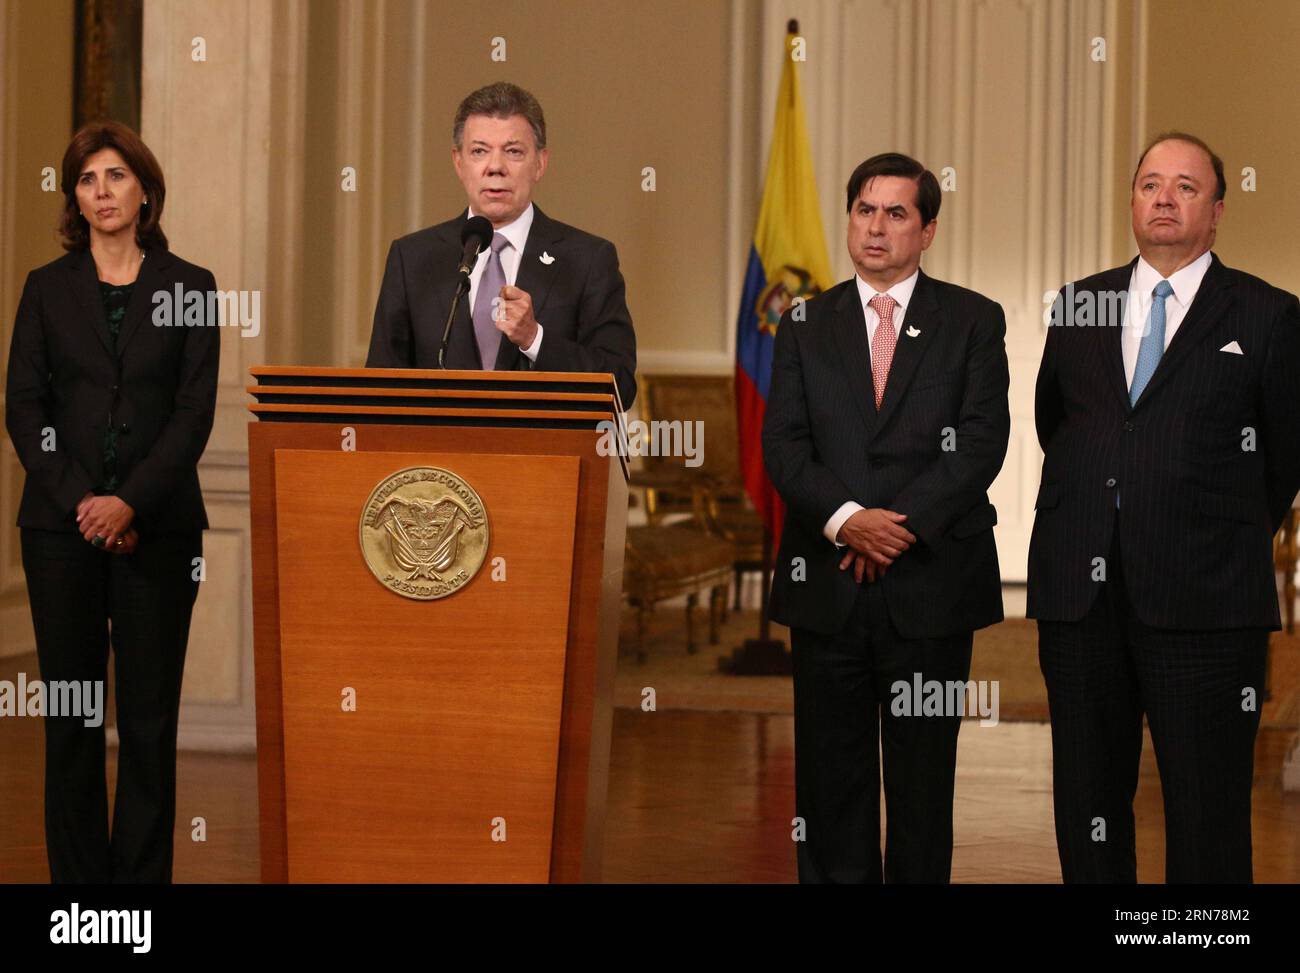 BOGOTA, Aug. 25, 2015 -- Image provided by shows Colombian President Juan Manuel Santos (2nd, L) delivering a speech, accompanied by the Colombian Foreign Minister Maria Angela Holguin (1st, L), Minister of Interior Juan Fernando Cristo (2nd, R) and Defense Minister Luis Carlos Villegas (1st, R), at the Narino Palace in Bogota, Colombia, on Aug. 25, 2015. Juan Manuel Santos reiterated that the differences between Colombia and Venezuela can be overcome with dialogue and diplomacy , following the closure of an important border post between the two countries. Nelson Cardenas/) (jp) COLOMBIA-BOGOT Stock Photo